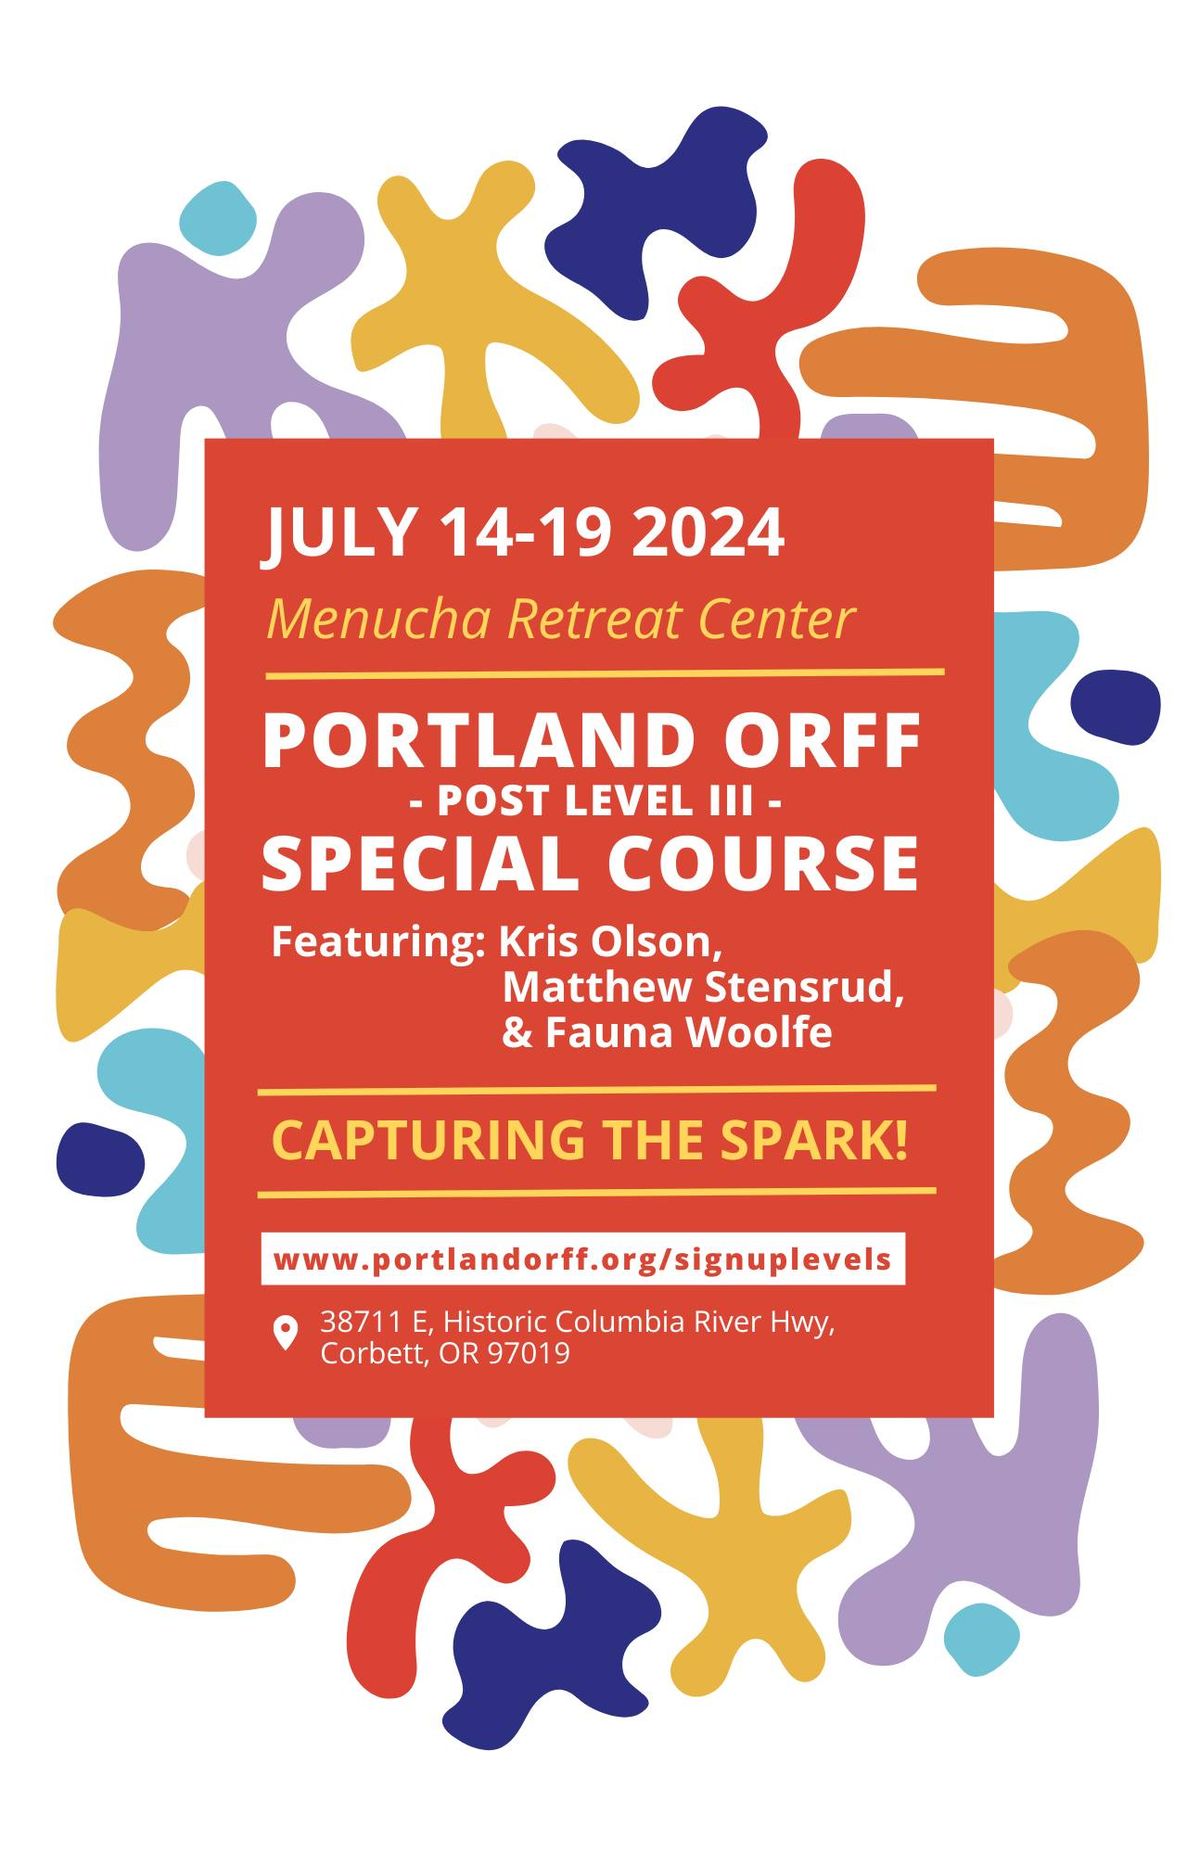 "Capturing the Spark" Post Level III Portland Orff Special Course